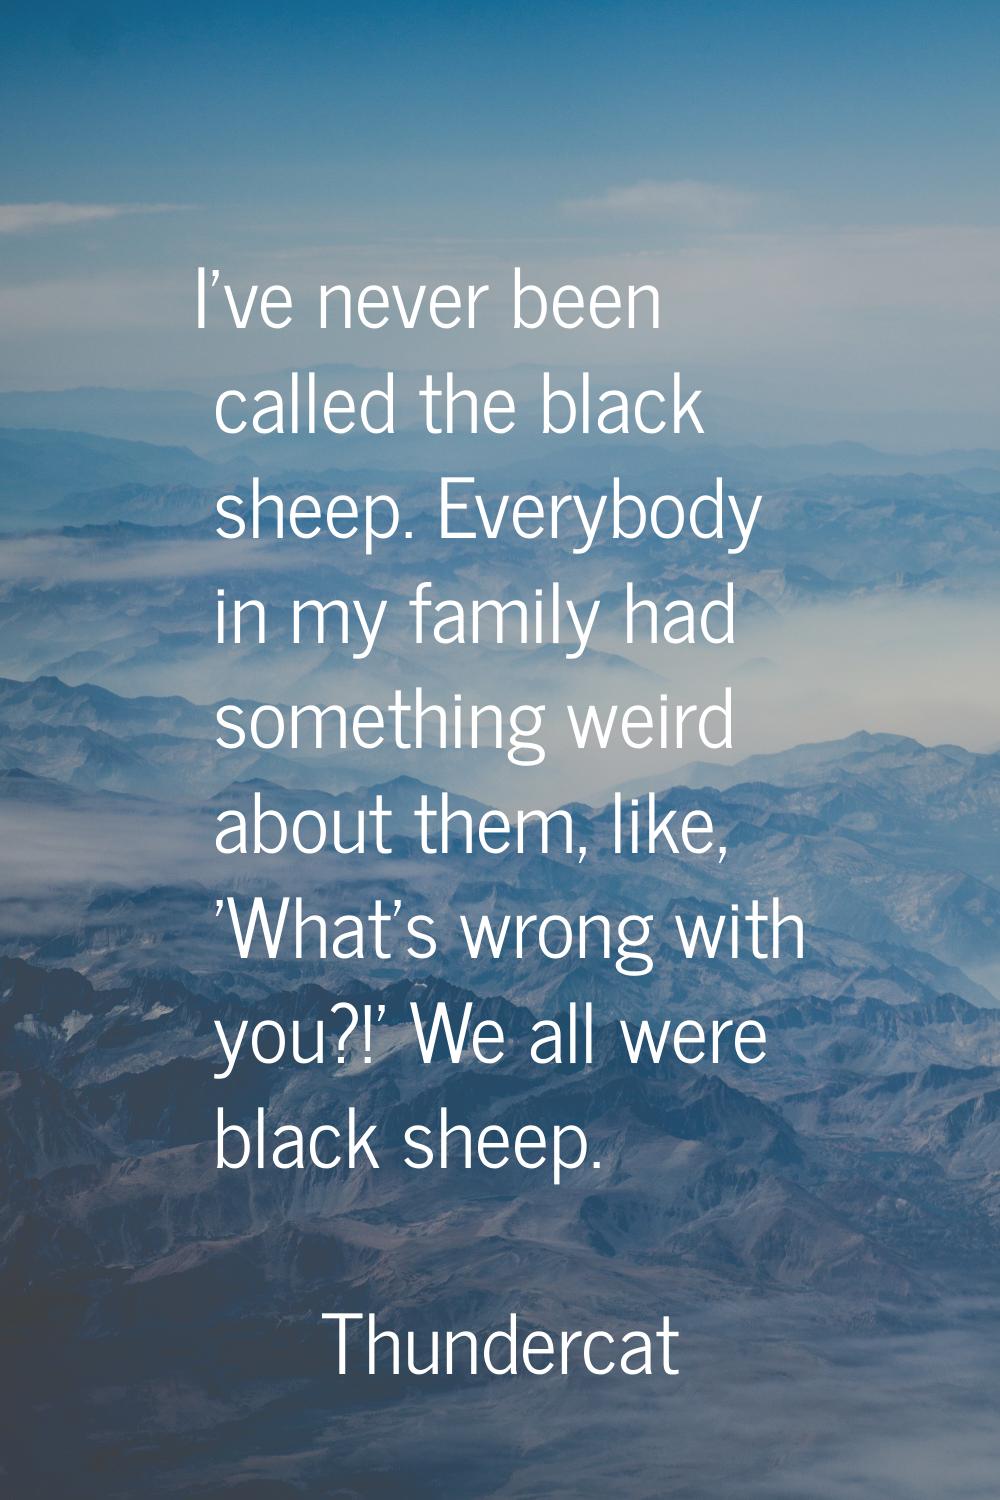 I've never been called the black sheep. Everybody in my family had something weird about them, like